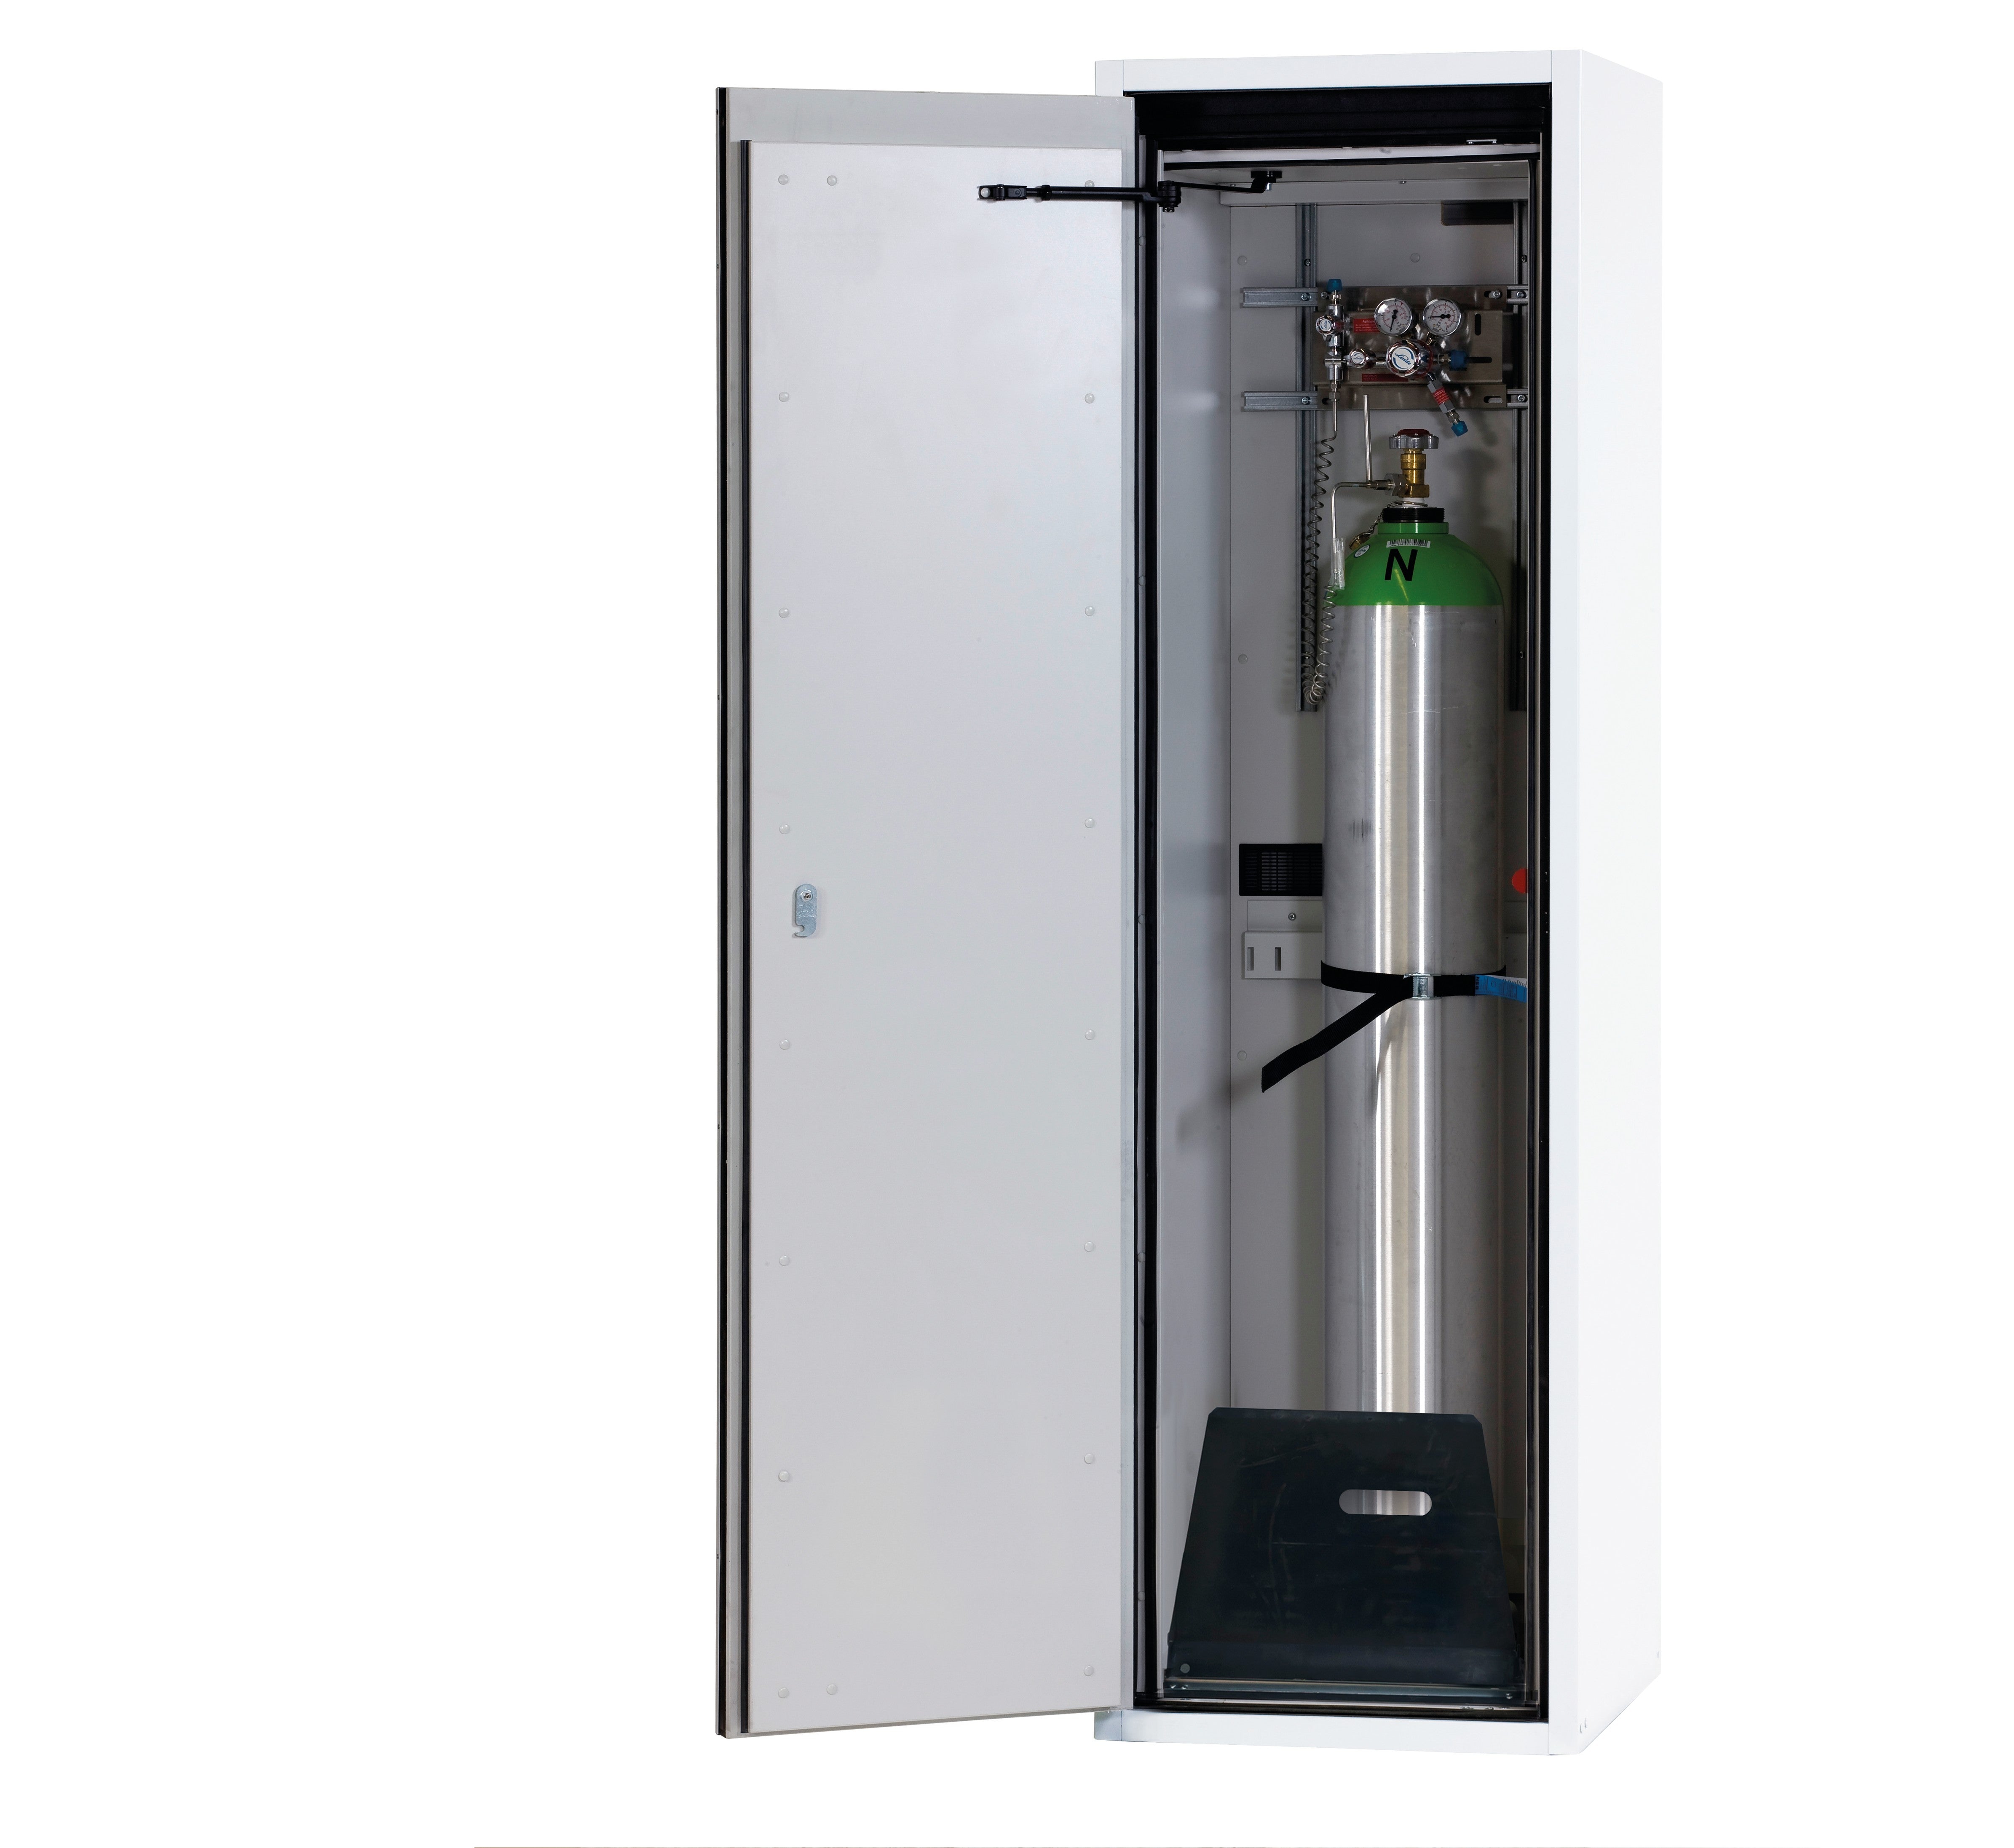 Type 90 compressed gas bottle cabinet G-ULTIMATE-90 model G90.205.060 in laboratory white (similar to RAL 9016) with standard interior fittings for 1x compressed gas bottles of 50 liters each